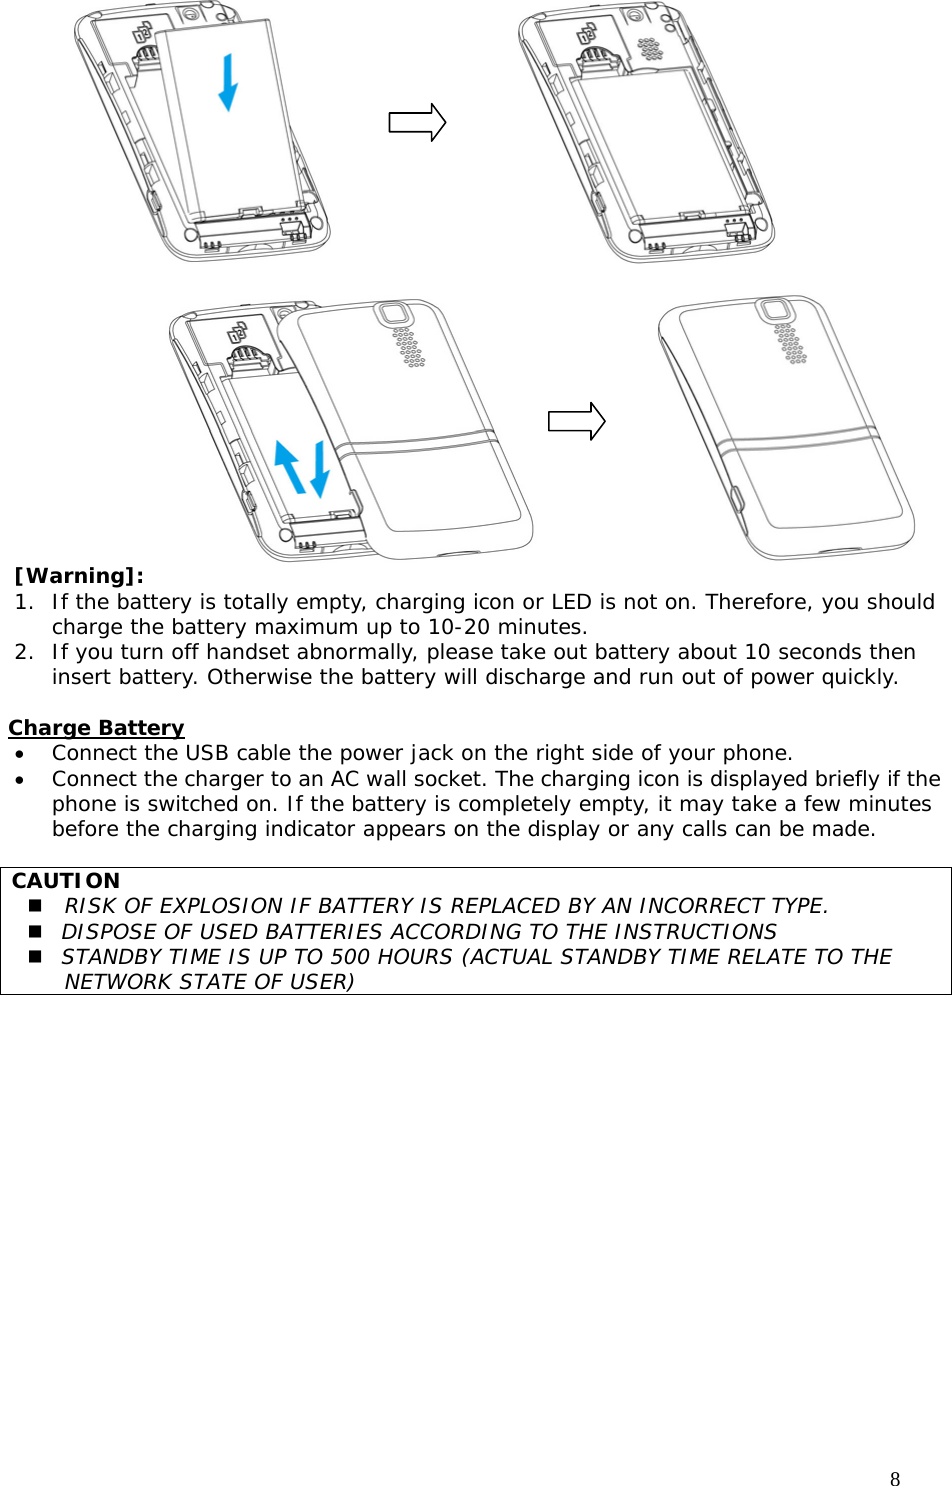                                     8                                                      [Warning]:  1. If the battery is totally empty, charging icon or LED is not on. Therefore, you should charge the battery maximum up to 10-20 minutes. 2. If you turn off handset abnormally, please take out battery about 10 seconds then insert battery. Otherwise the battery will discharge and run out of power quickly.  Charge Battery • Connect the USB cable the power jack on the right side of your phone. • Connect the charger to an AC wall socket. The charging icon is displayed briefly if the phone is switched on. If the battery is completely empty, it may take a few minutes before the charging indicator appears on the display or any calls can be made.  CAUTION  RISK OF EXPLOSION IF BATTERY IS REPLACED BY AN INCORRECT TYPE.  DISPOSE OF USED BATTERIES ACCORDING TO THE INSTRUCTIONS   STANDBY TIME IS UP TO 500 HOURS (ACTUAL STANDBY TIME RELATE TO THE NETWORK STATE OF USER)  